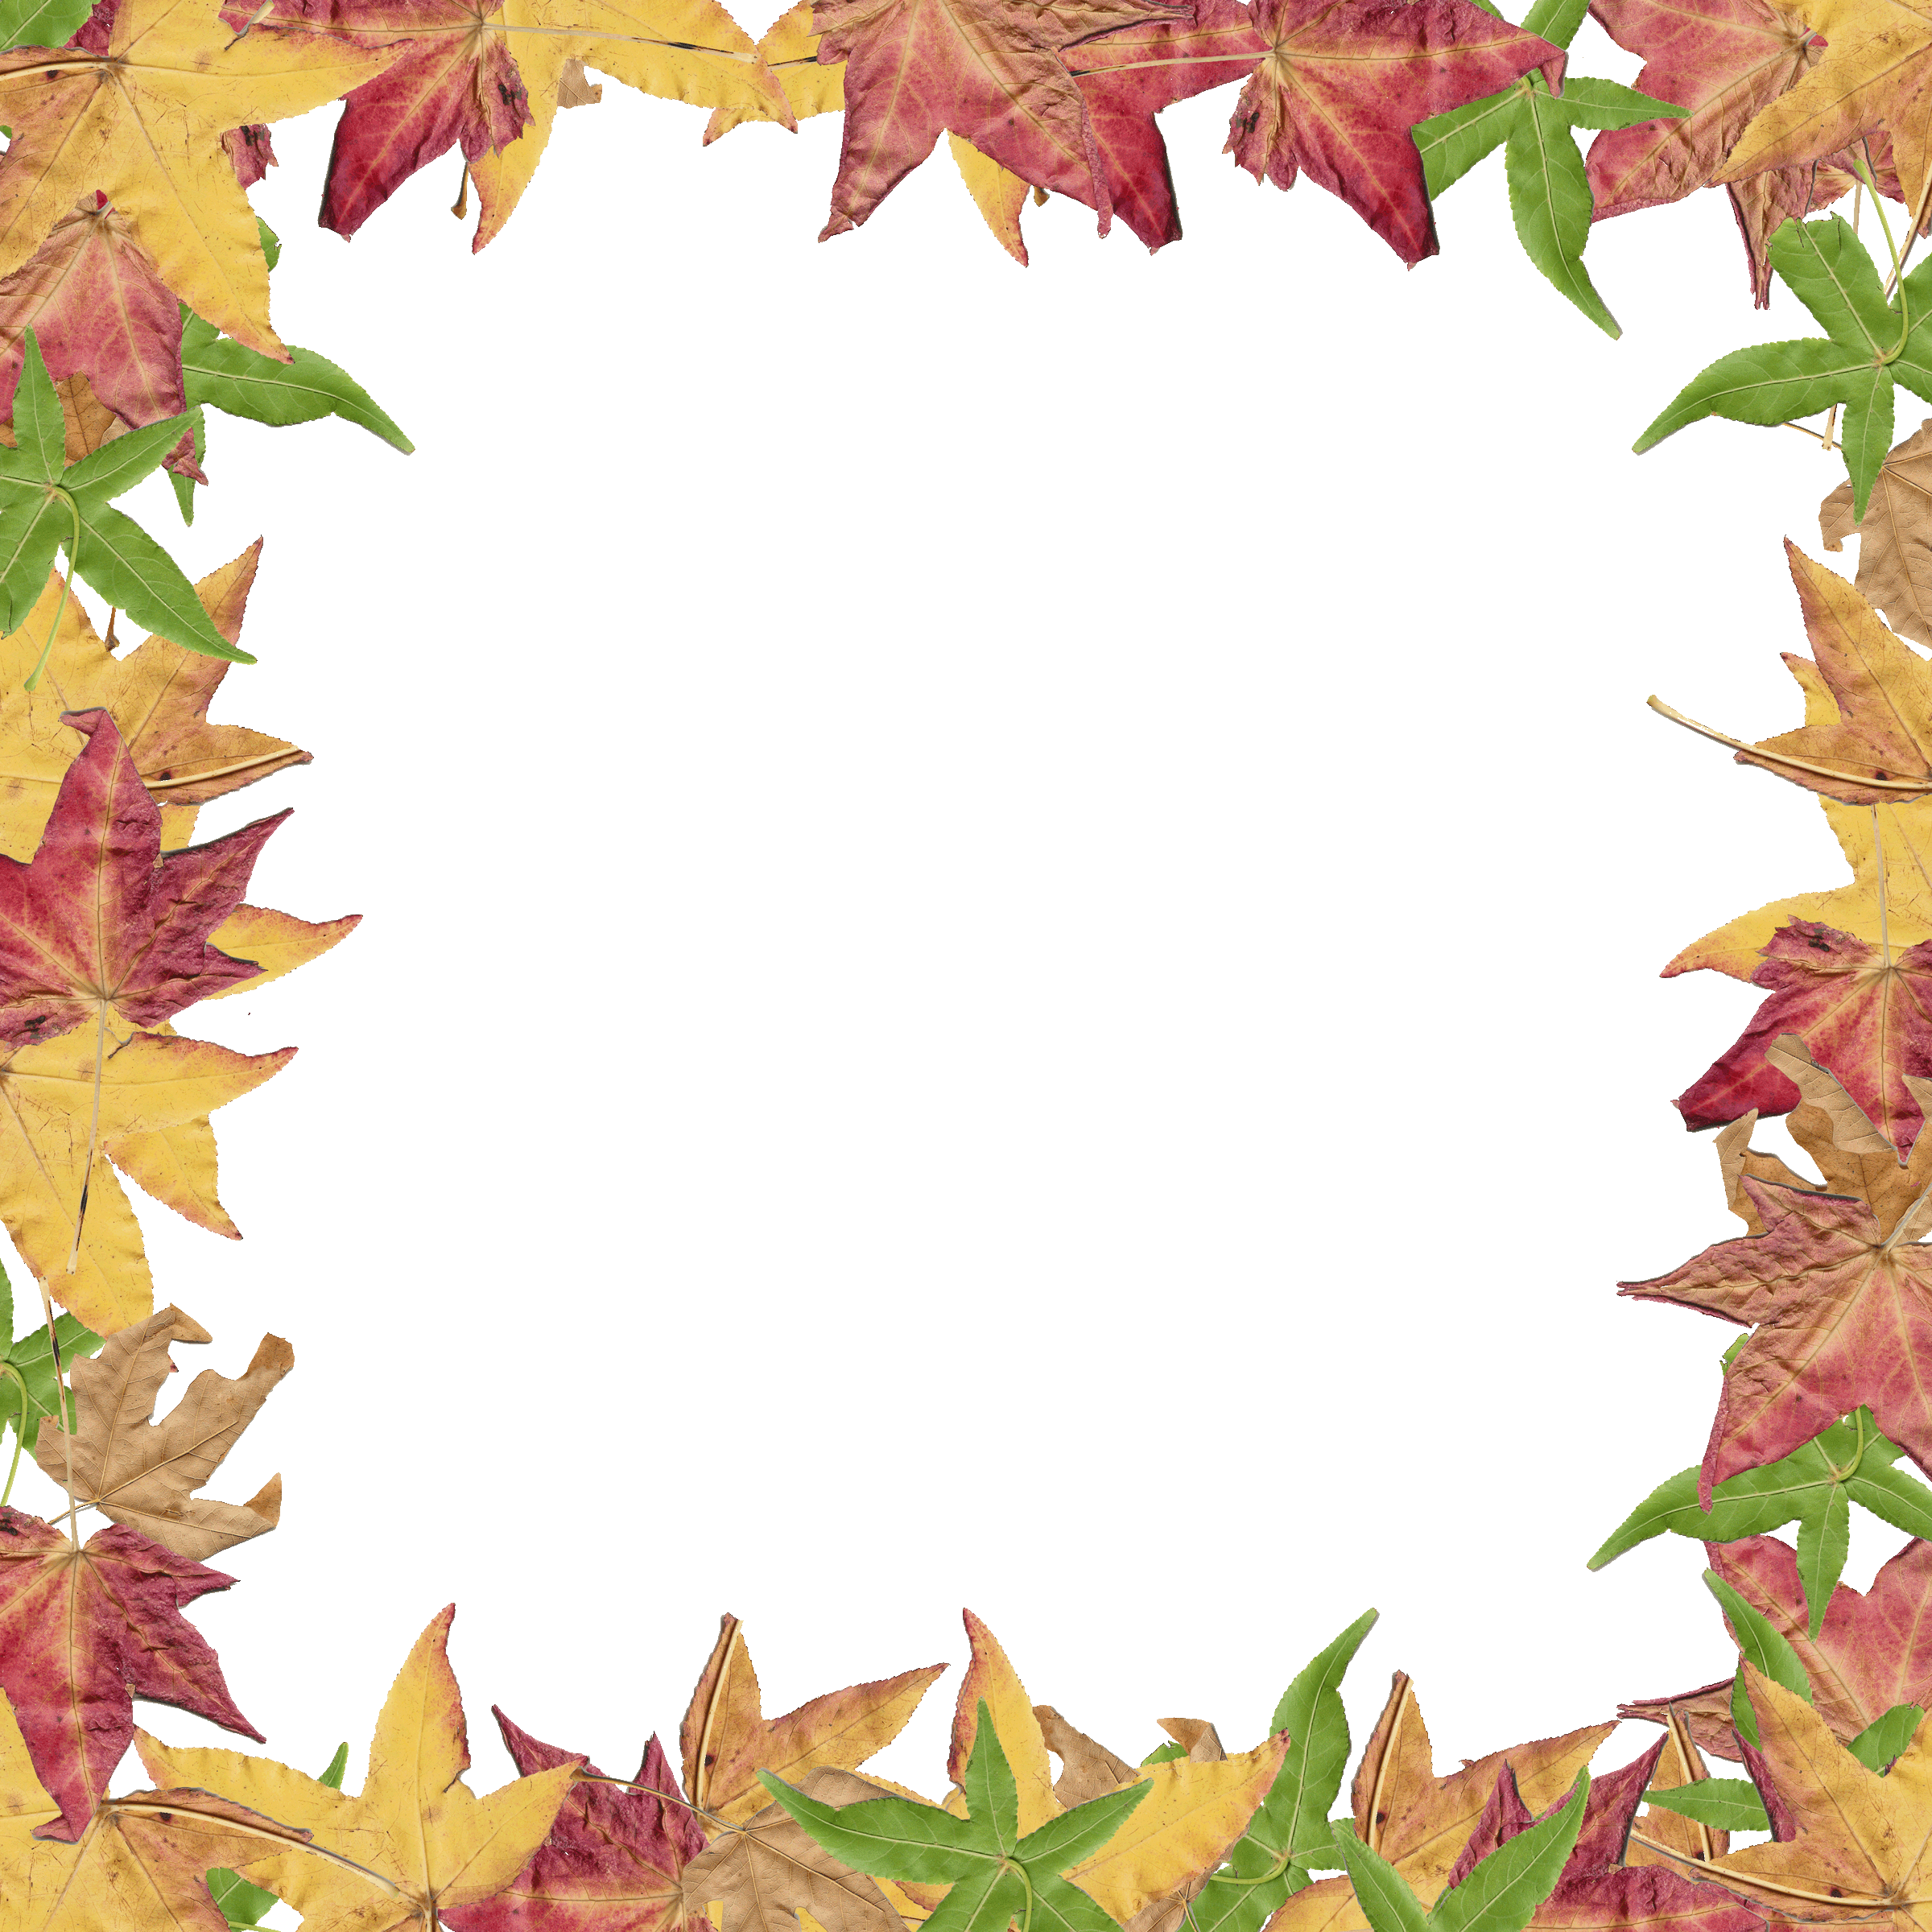 Leaf Page Borders Free ClipArt Best